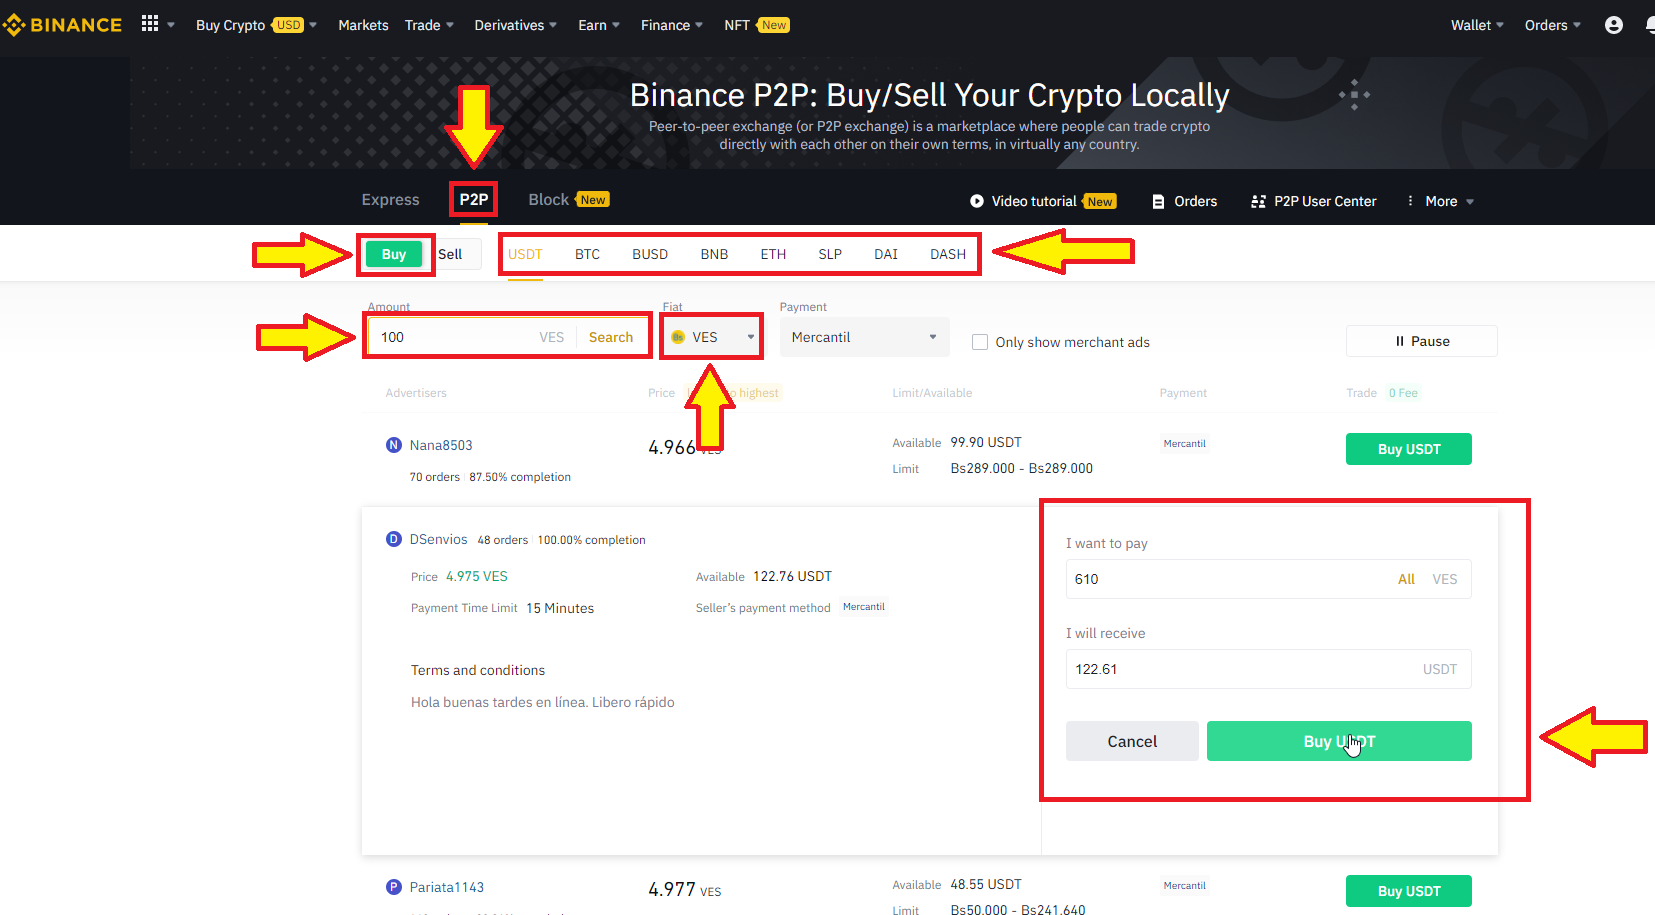 Buy Sensitrust crypto in P2P with a verified account on Binance